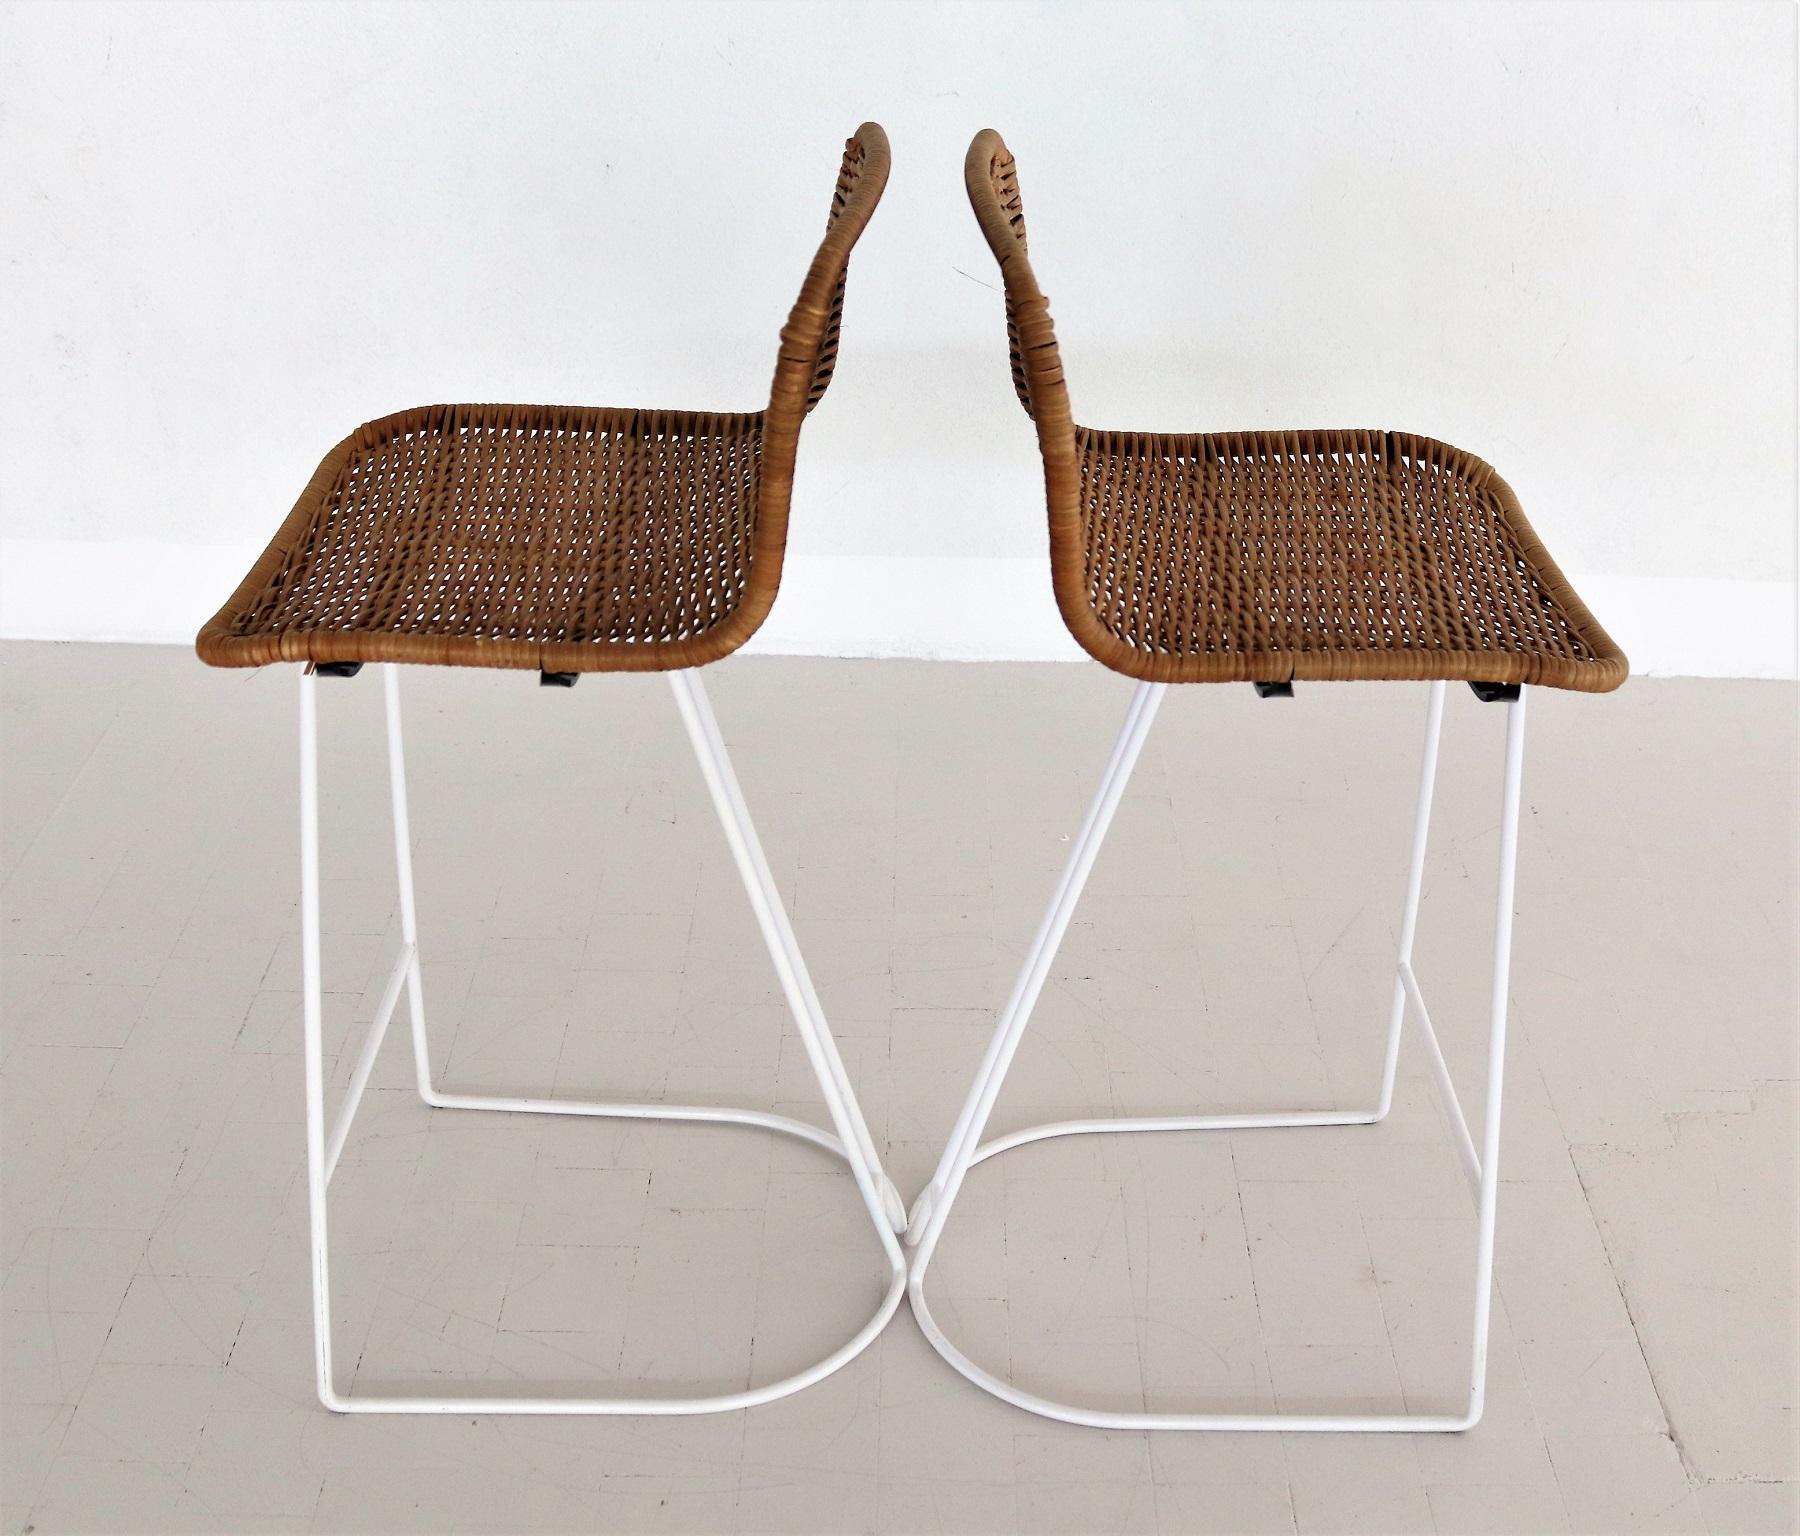 Italian Midcentury Bar Stools in Wicker and Metal by Cidue, 1980s For Sale 1